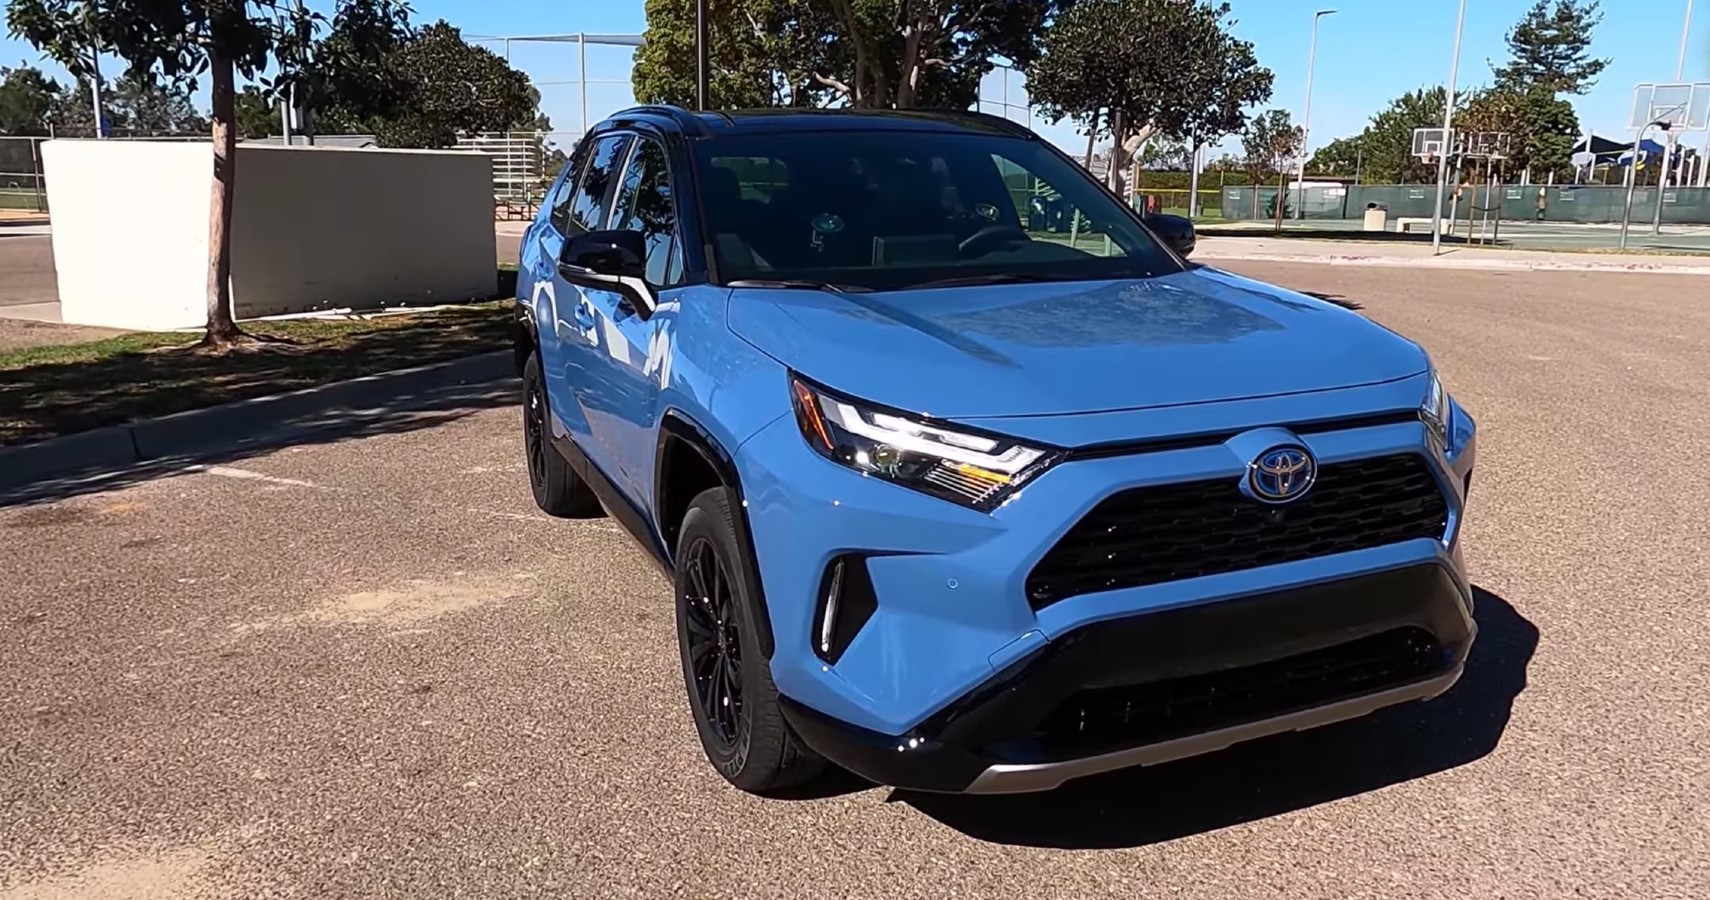 2022 Toyota RAV4 XSE Hybrid Is a Competent, Handsome, FamilyPerfect